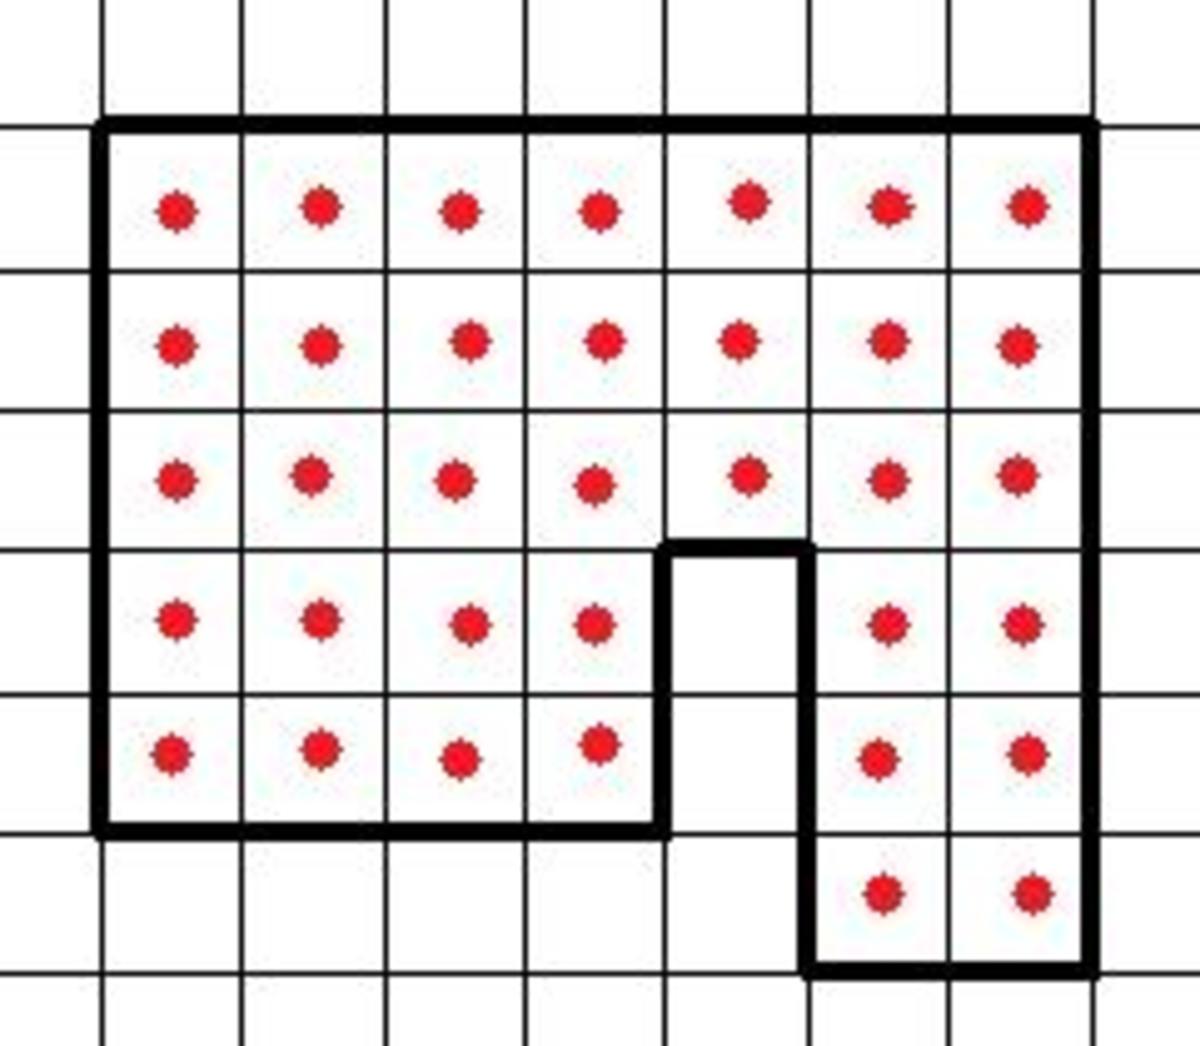 how-to-find-the-area-of-shape-by-counting-the-squares-year-6-maths